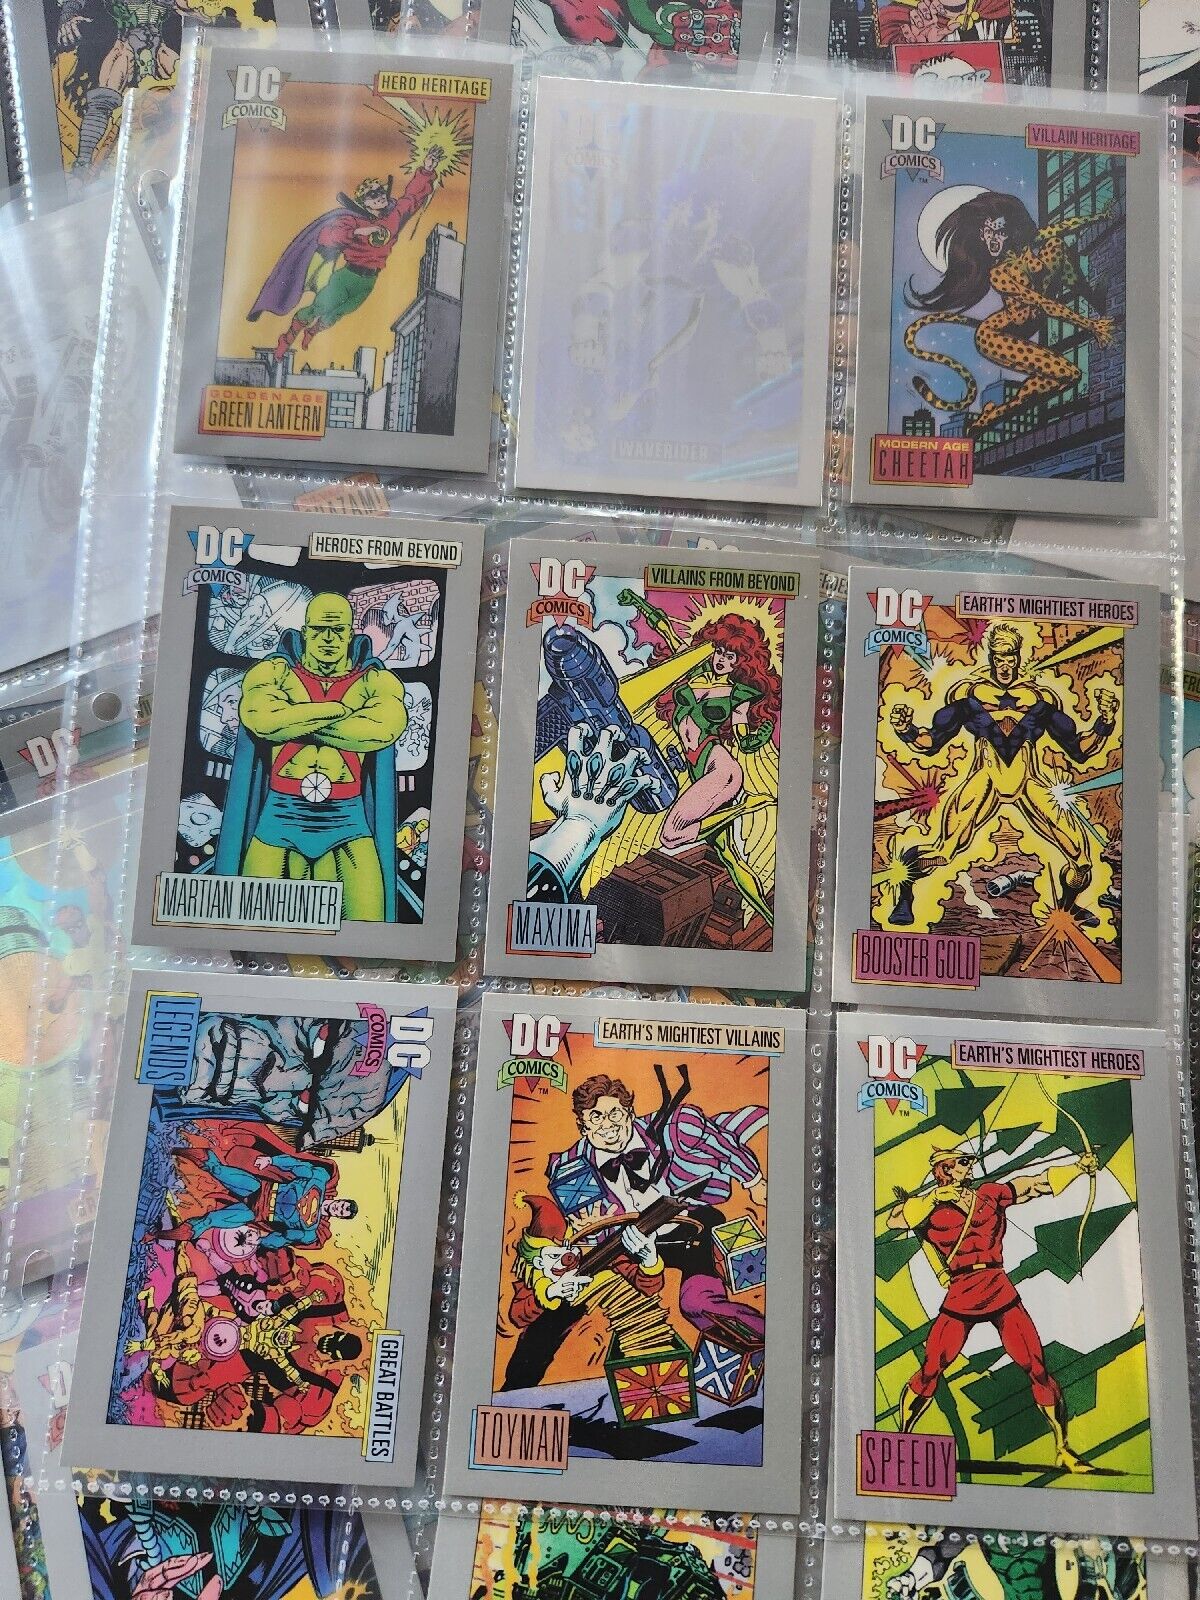 \'91-\'92 DC Trading Cards, Mixed Lot of 10 Cards.Good Cond. W 1 Holographic Card